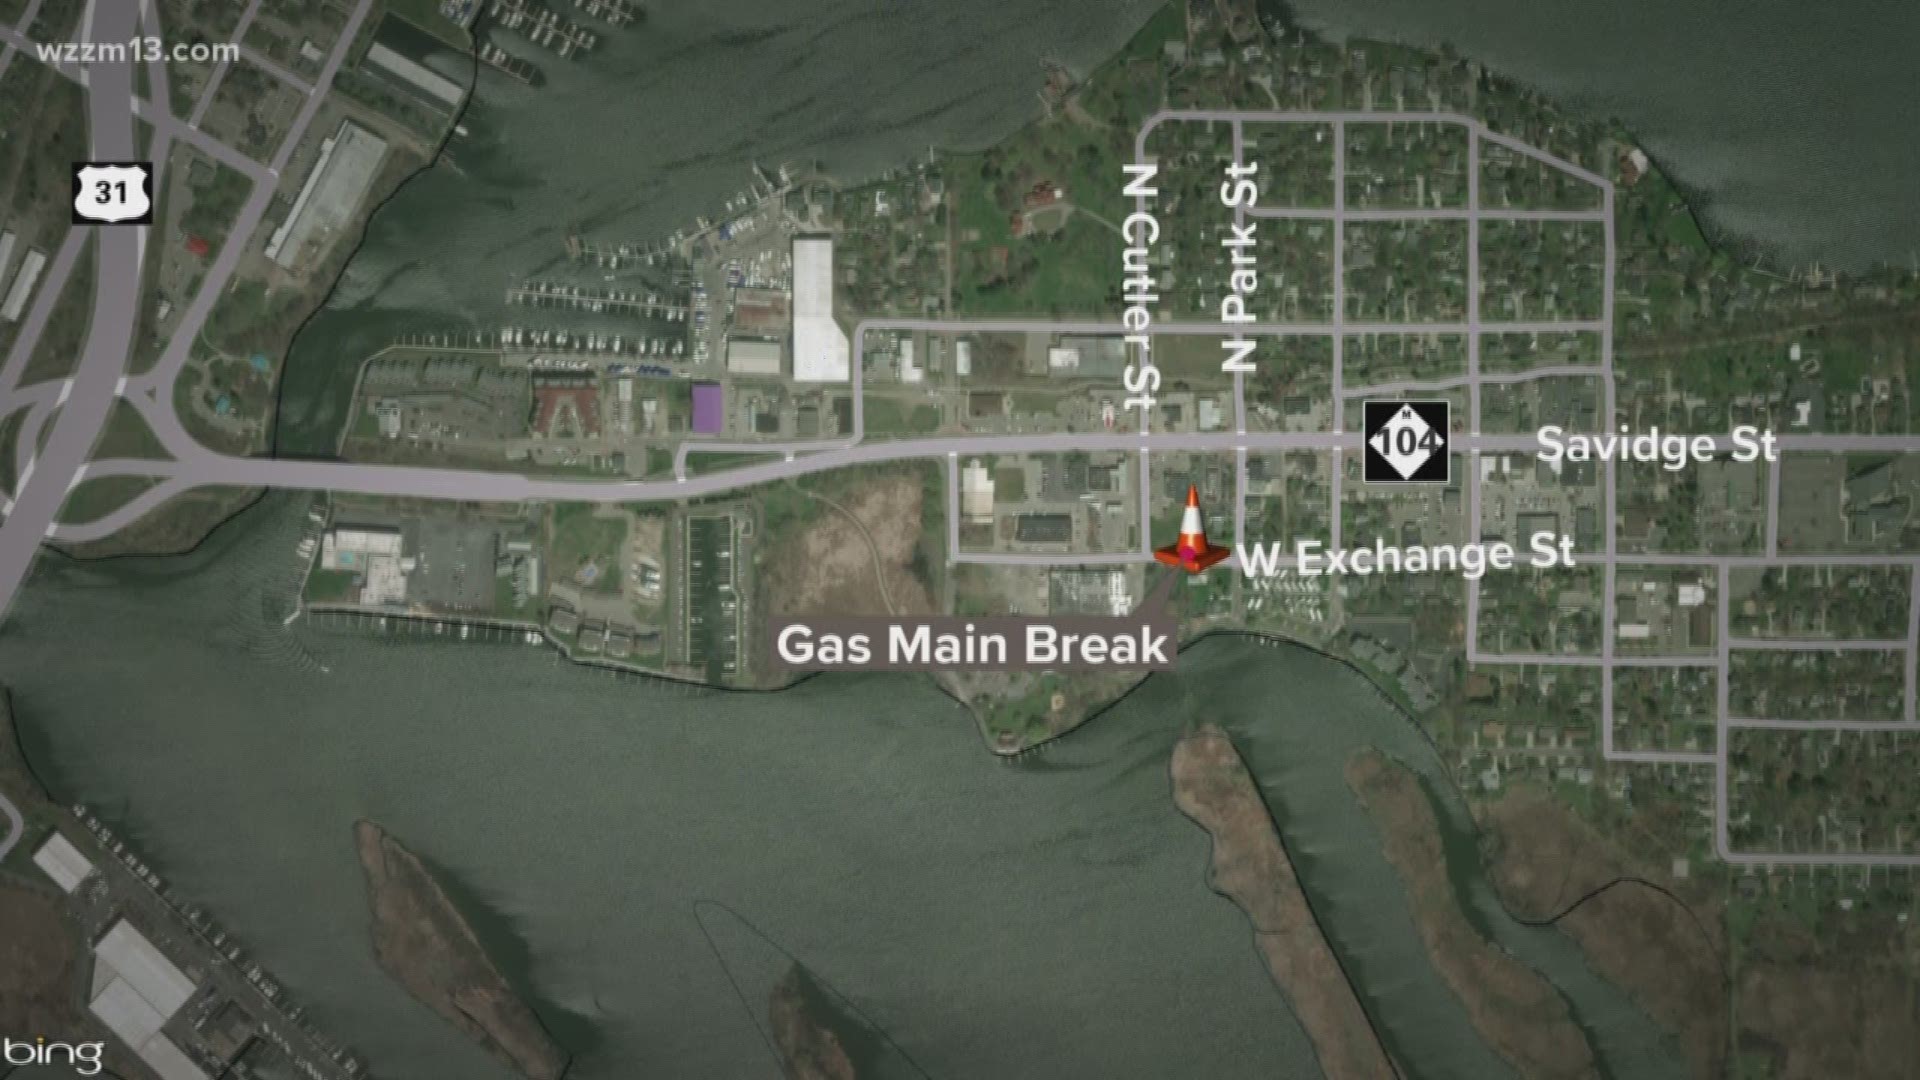 The gas main was struck Wednesday afternoon during a construction project in the village of Spring Lake, northwest of Grand Rapids. No injuries were reported, but crews monitored natural gas levels in the area.